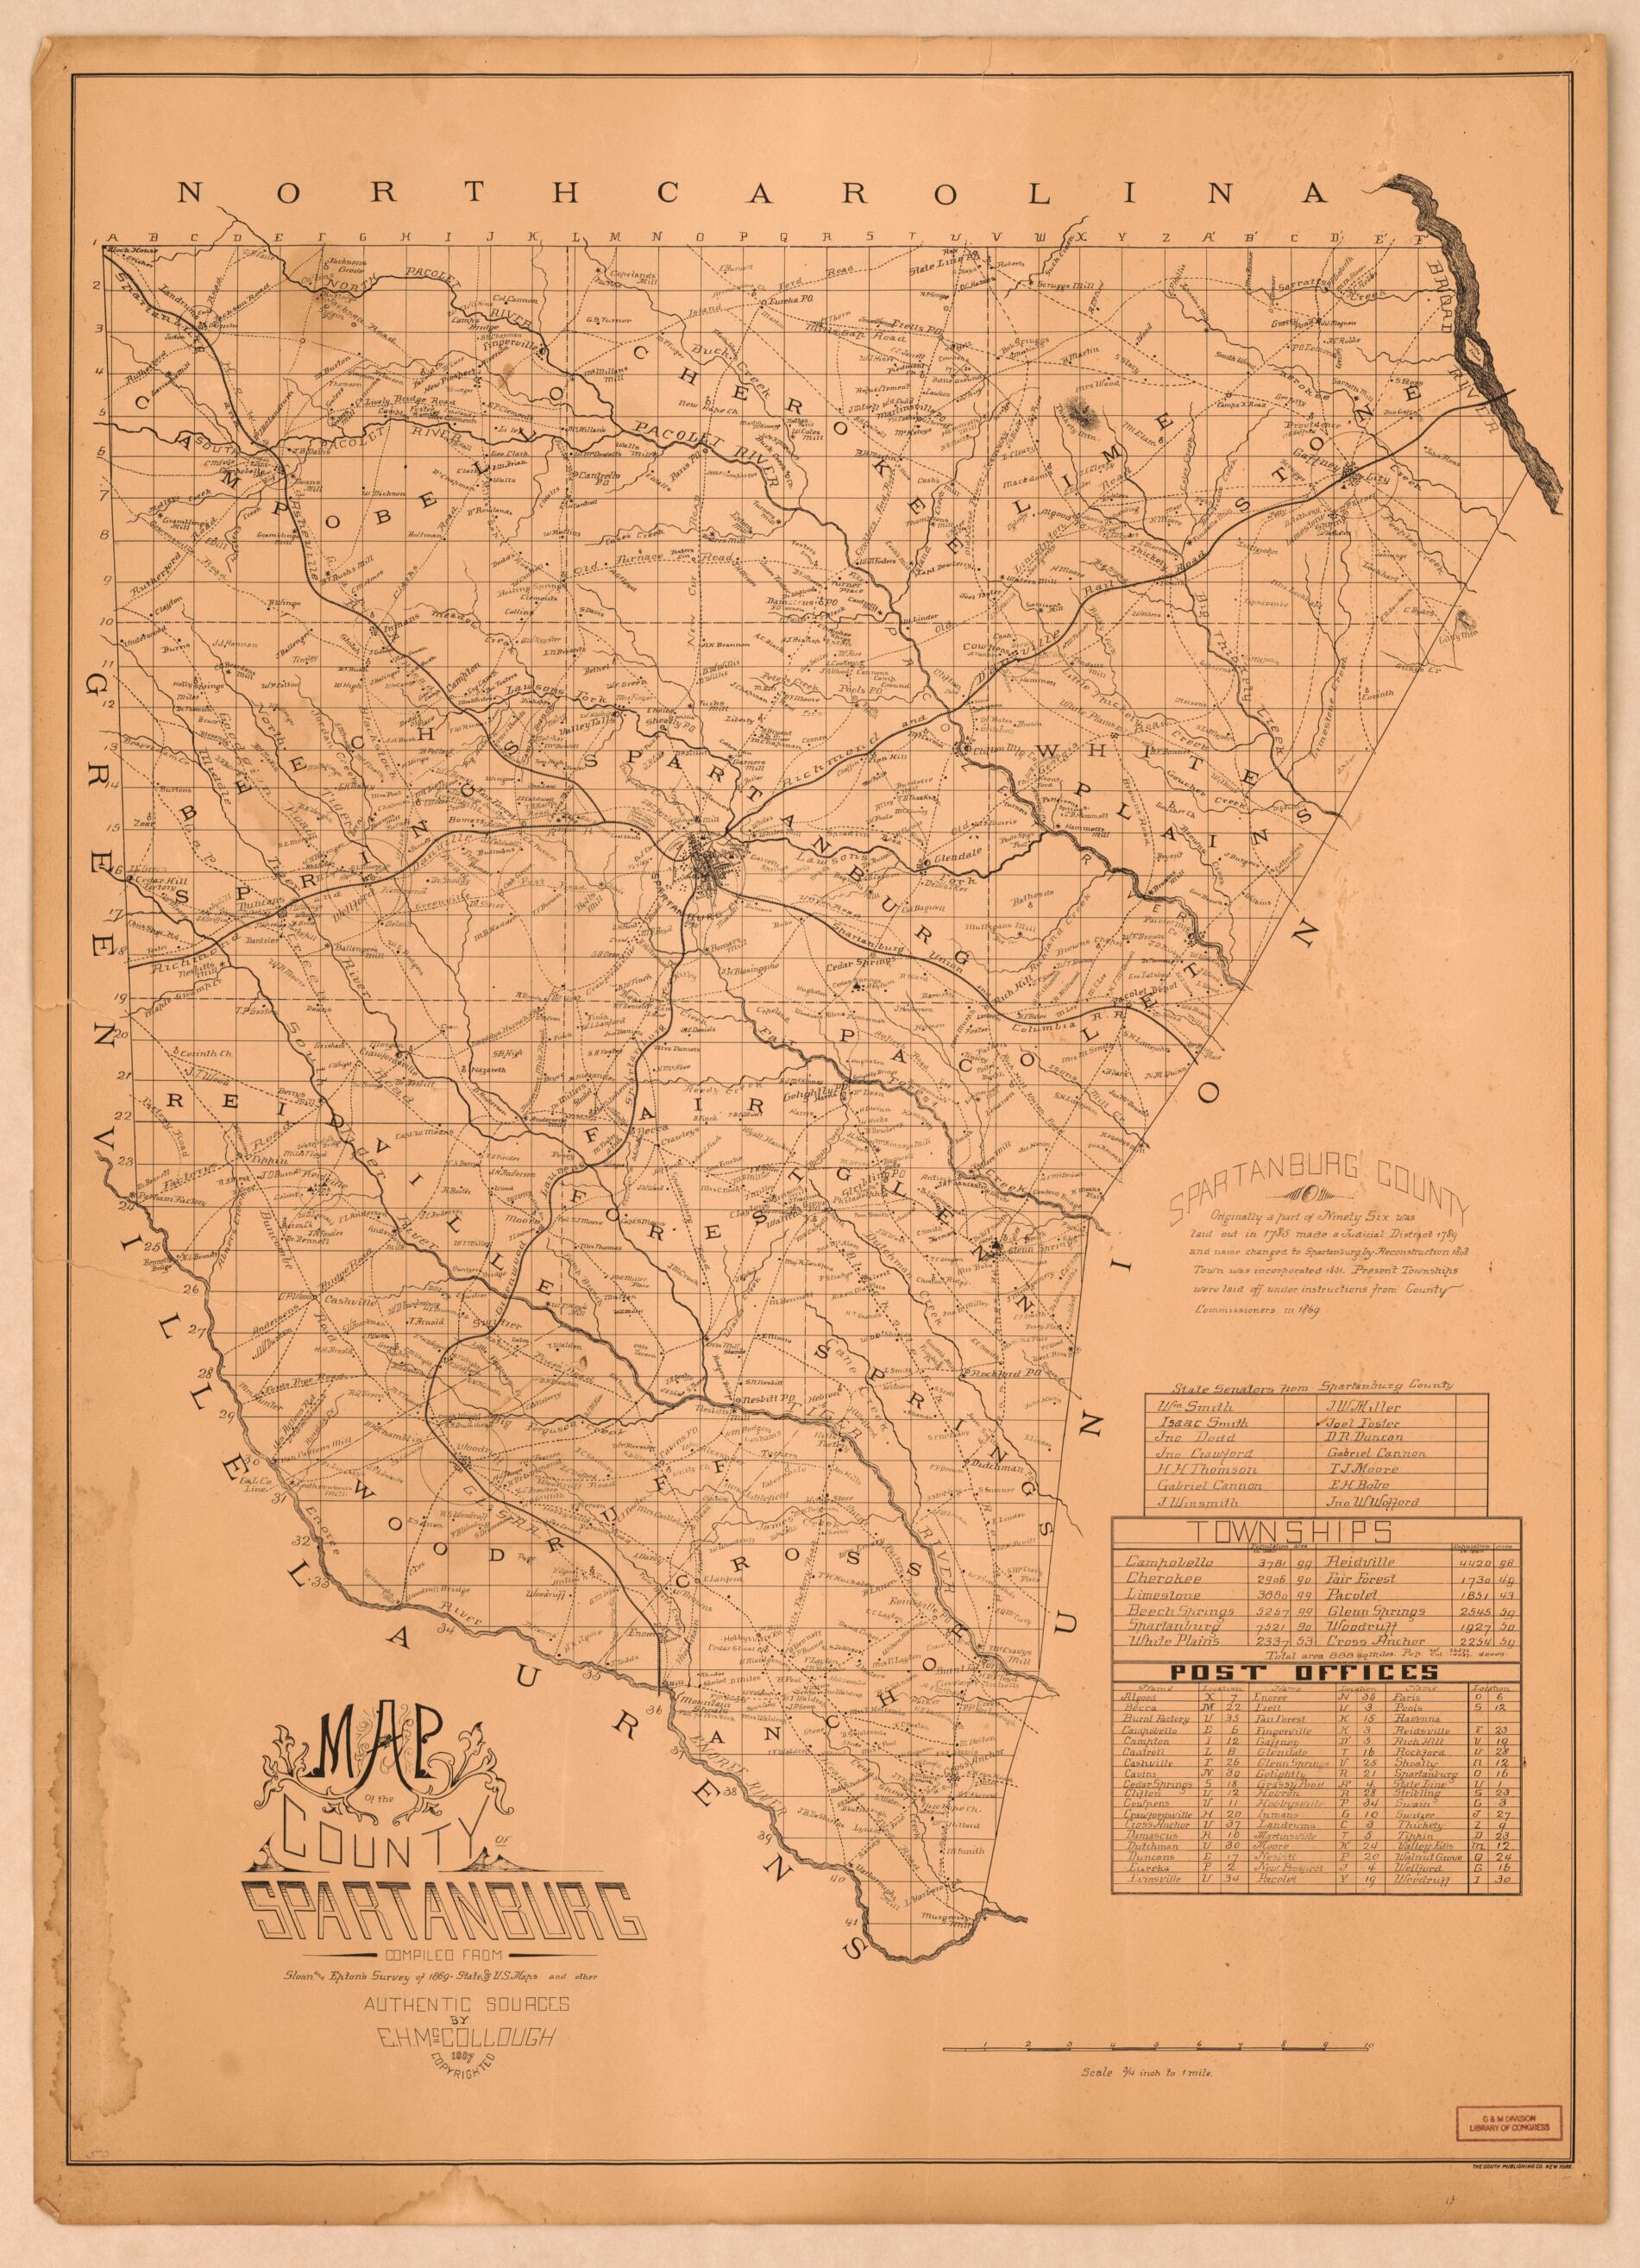 This old map of Map of the County of Spartanburg from 1887 was created by E. H. McCollough,  South Publishing Co in 1887